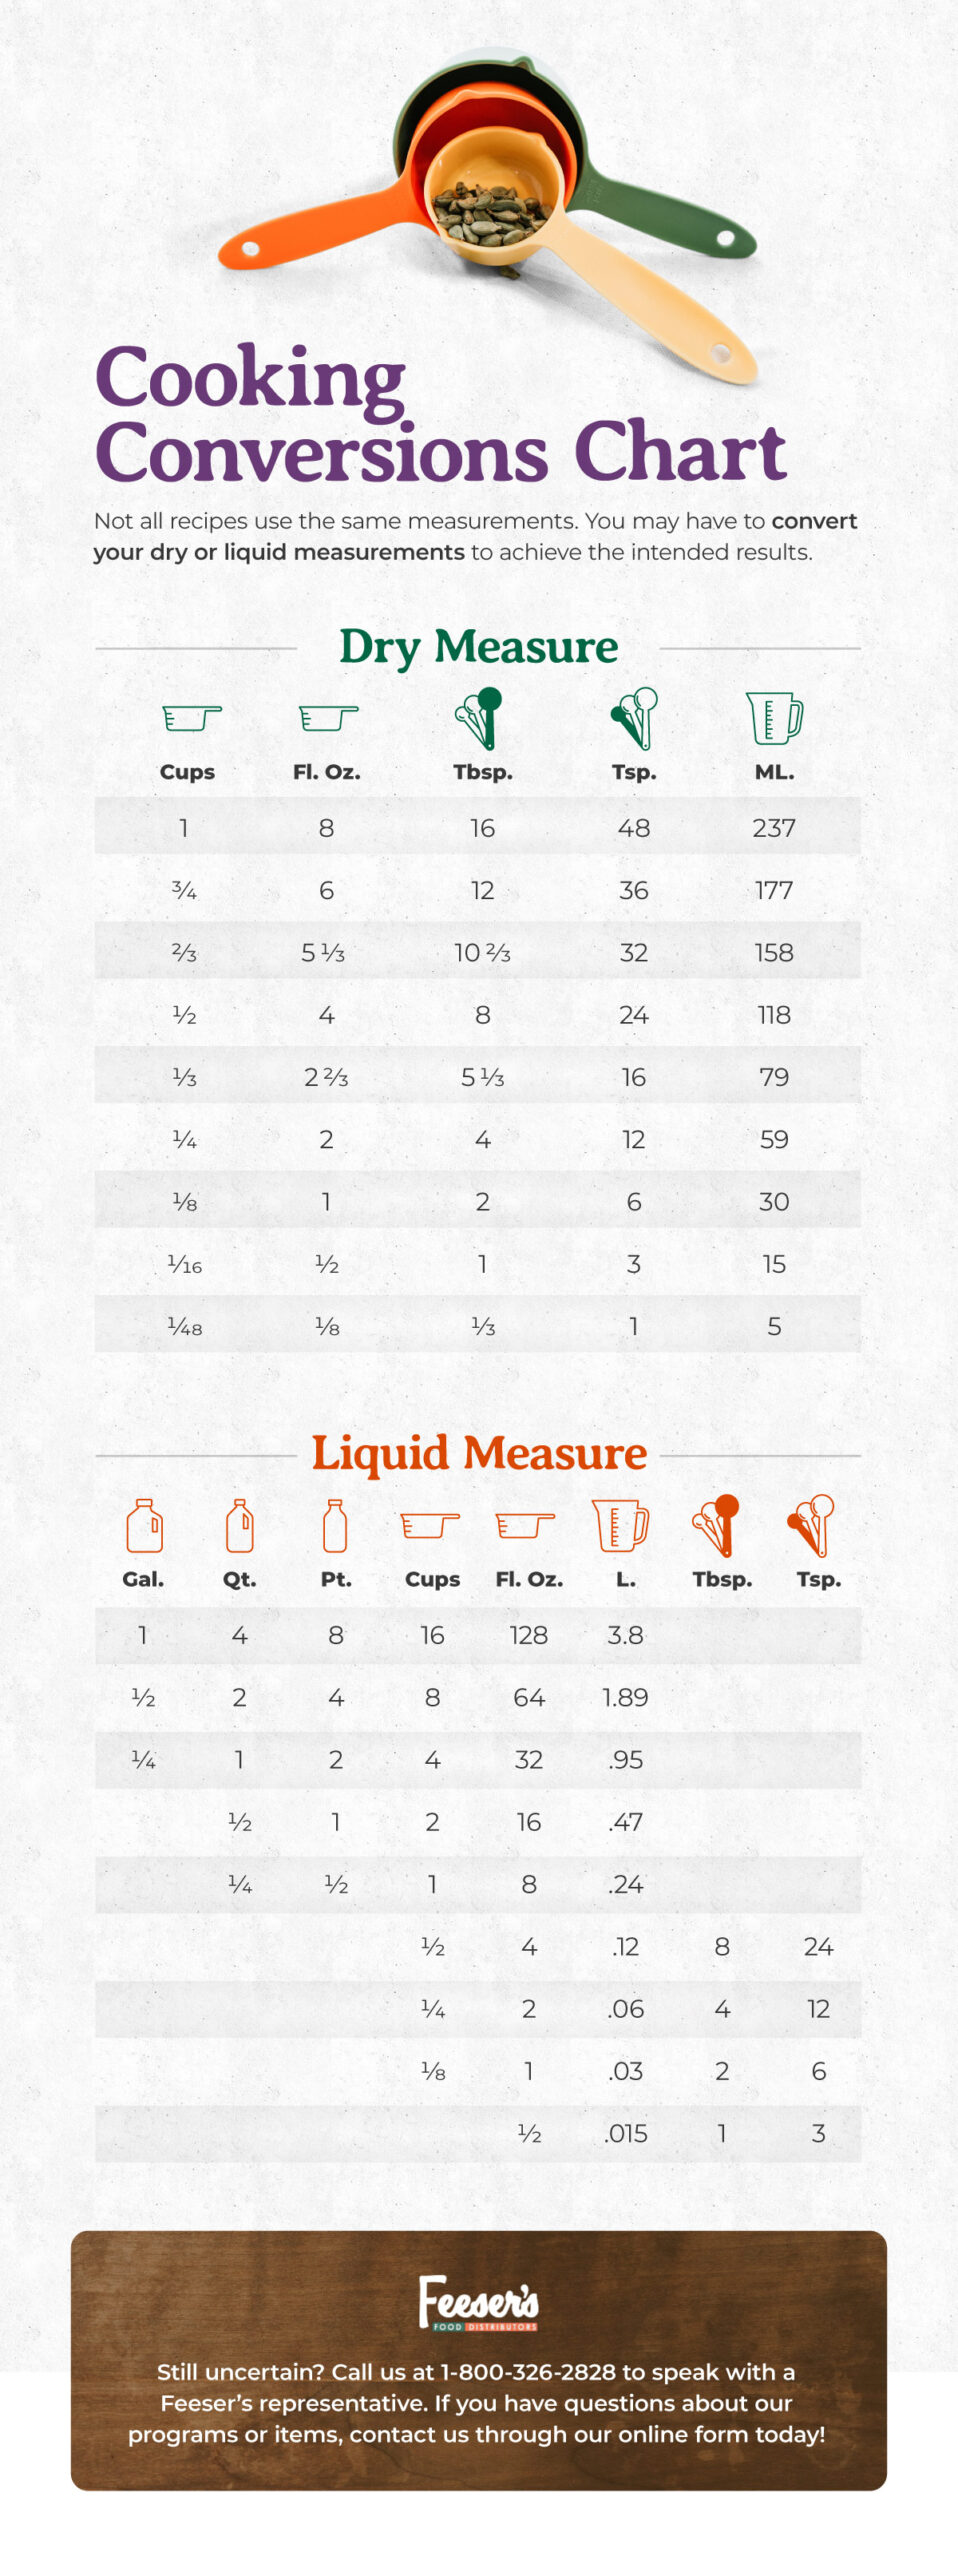 convert grams to cups table  Baking conversion chart, Baking conversions,  Cooking measurements